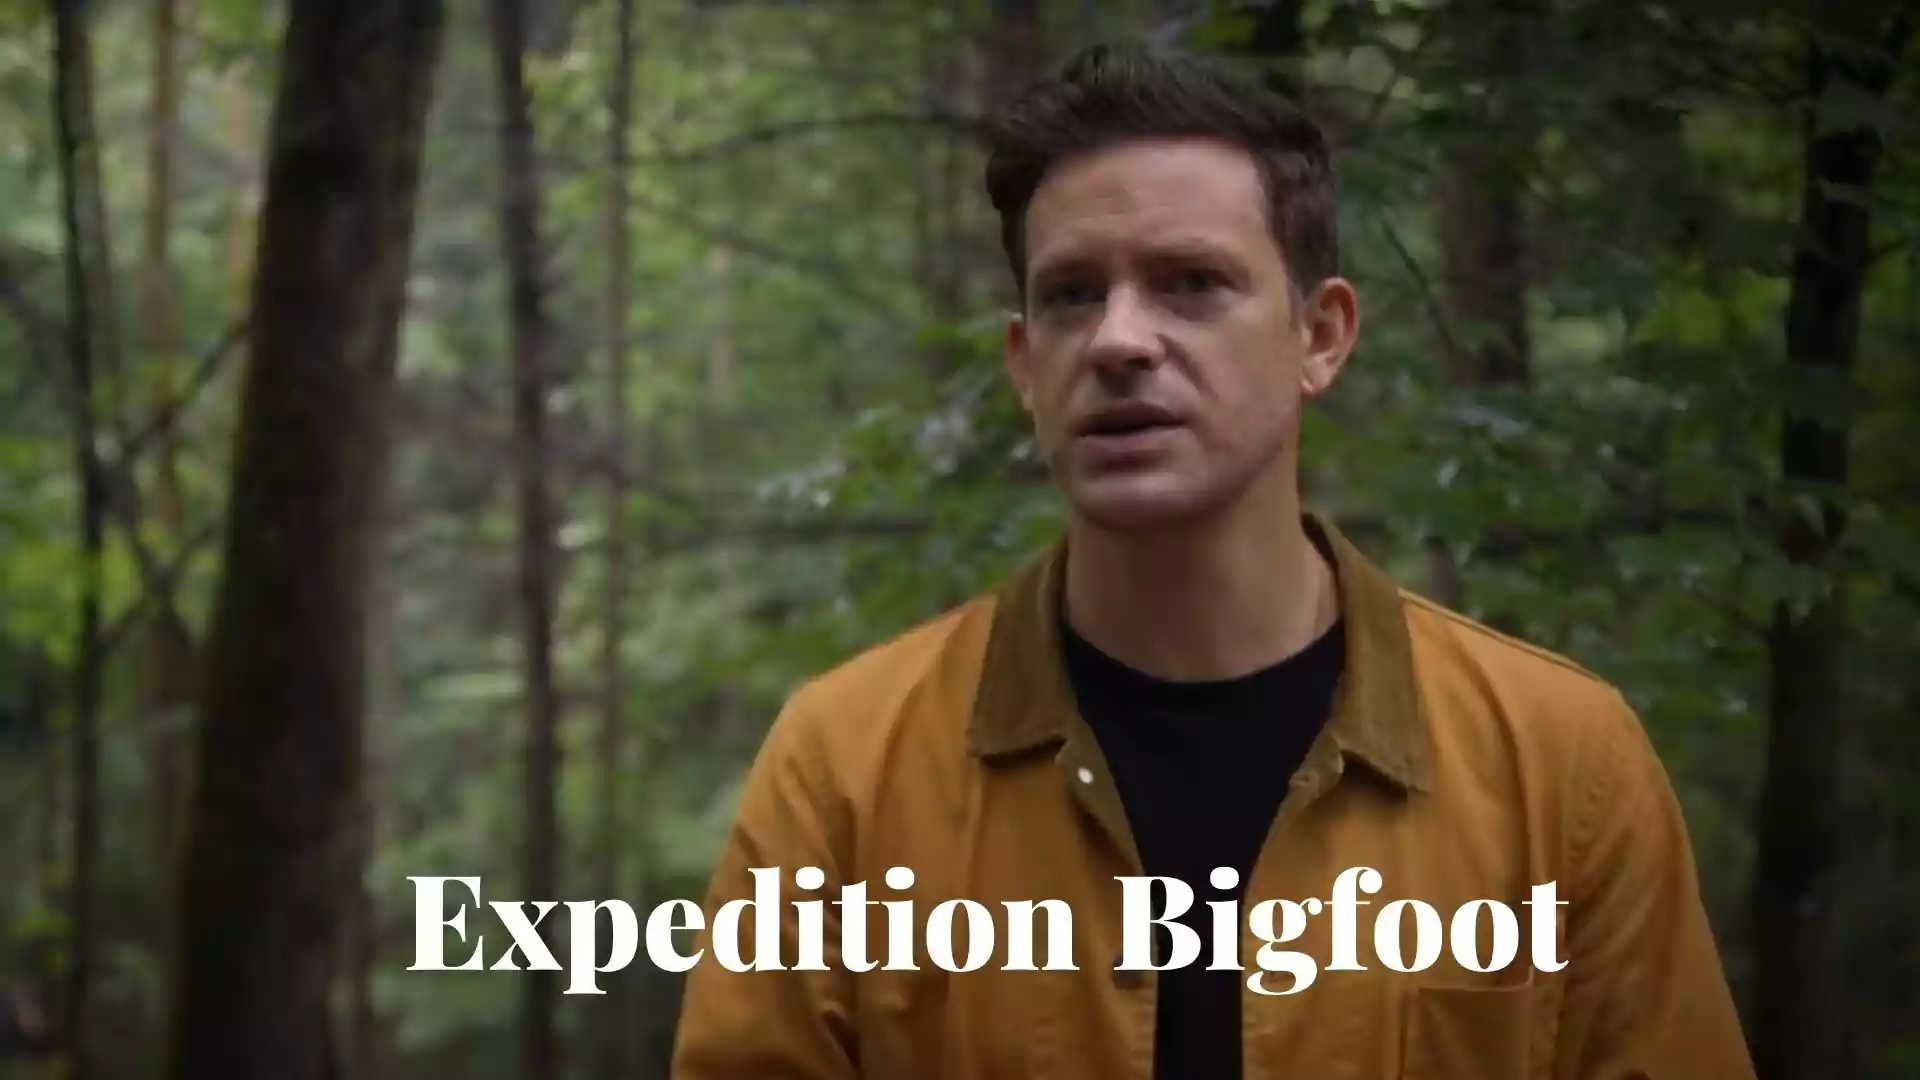 Expedition Bigfoot Parents Guide and Age Rating